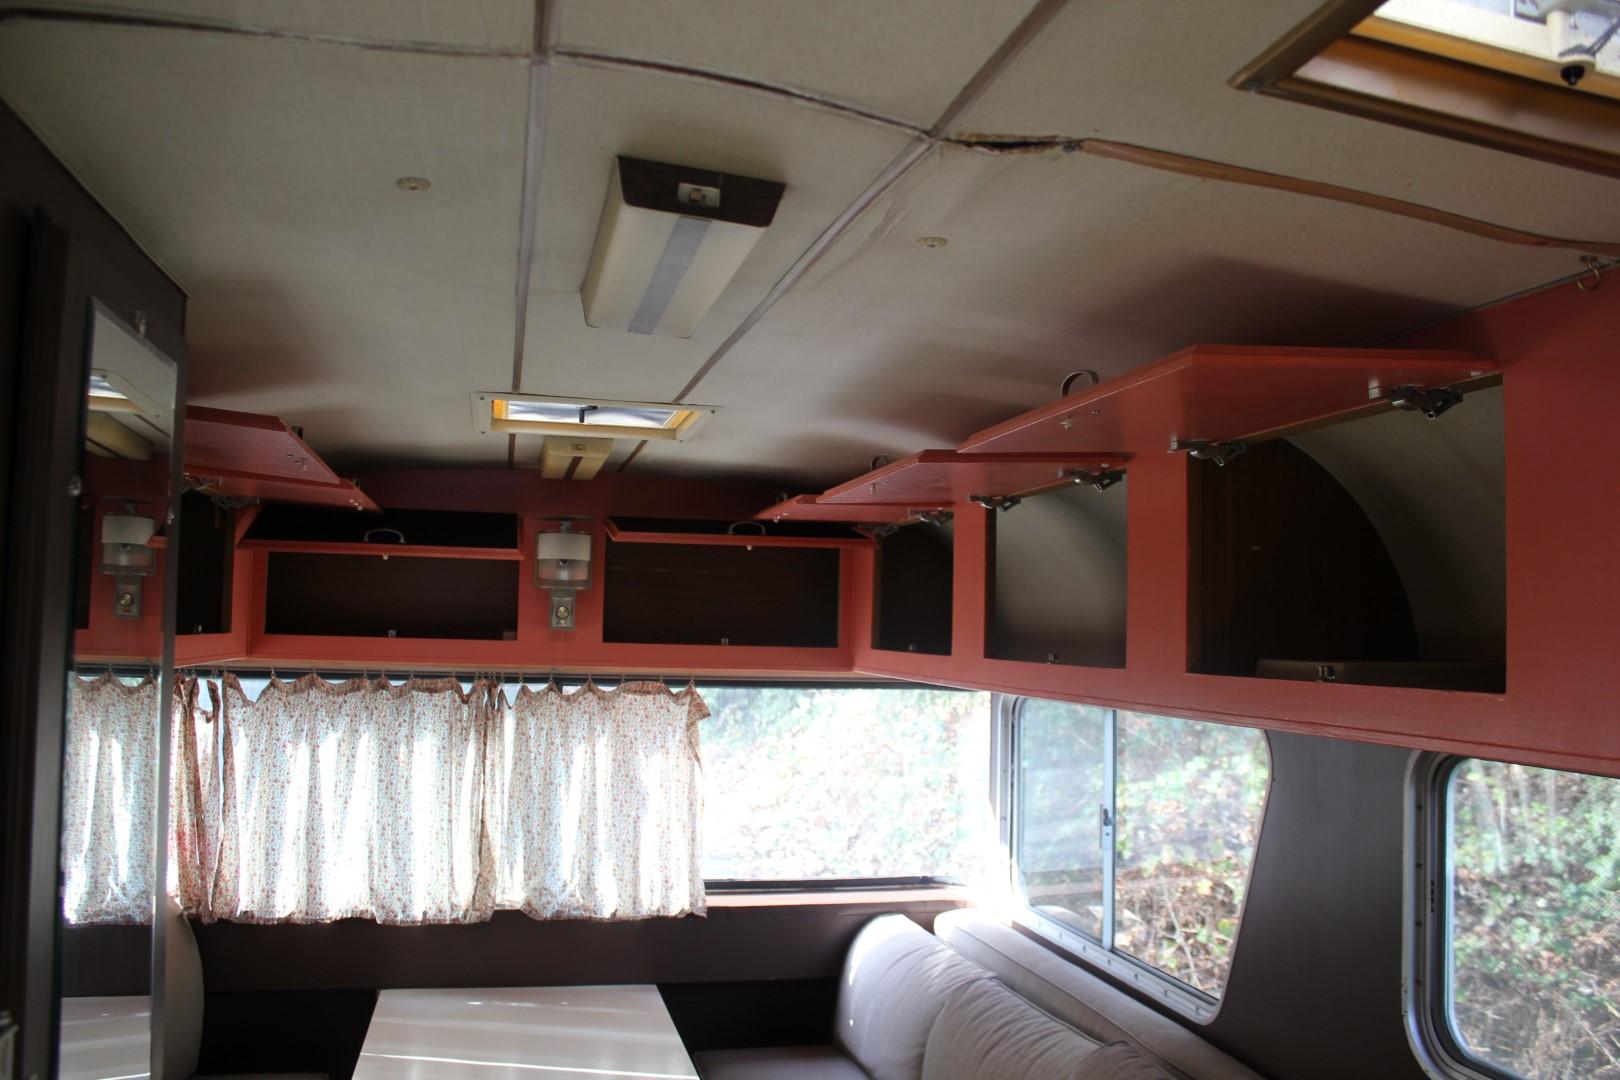 1975 Ford Chinook Camper